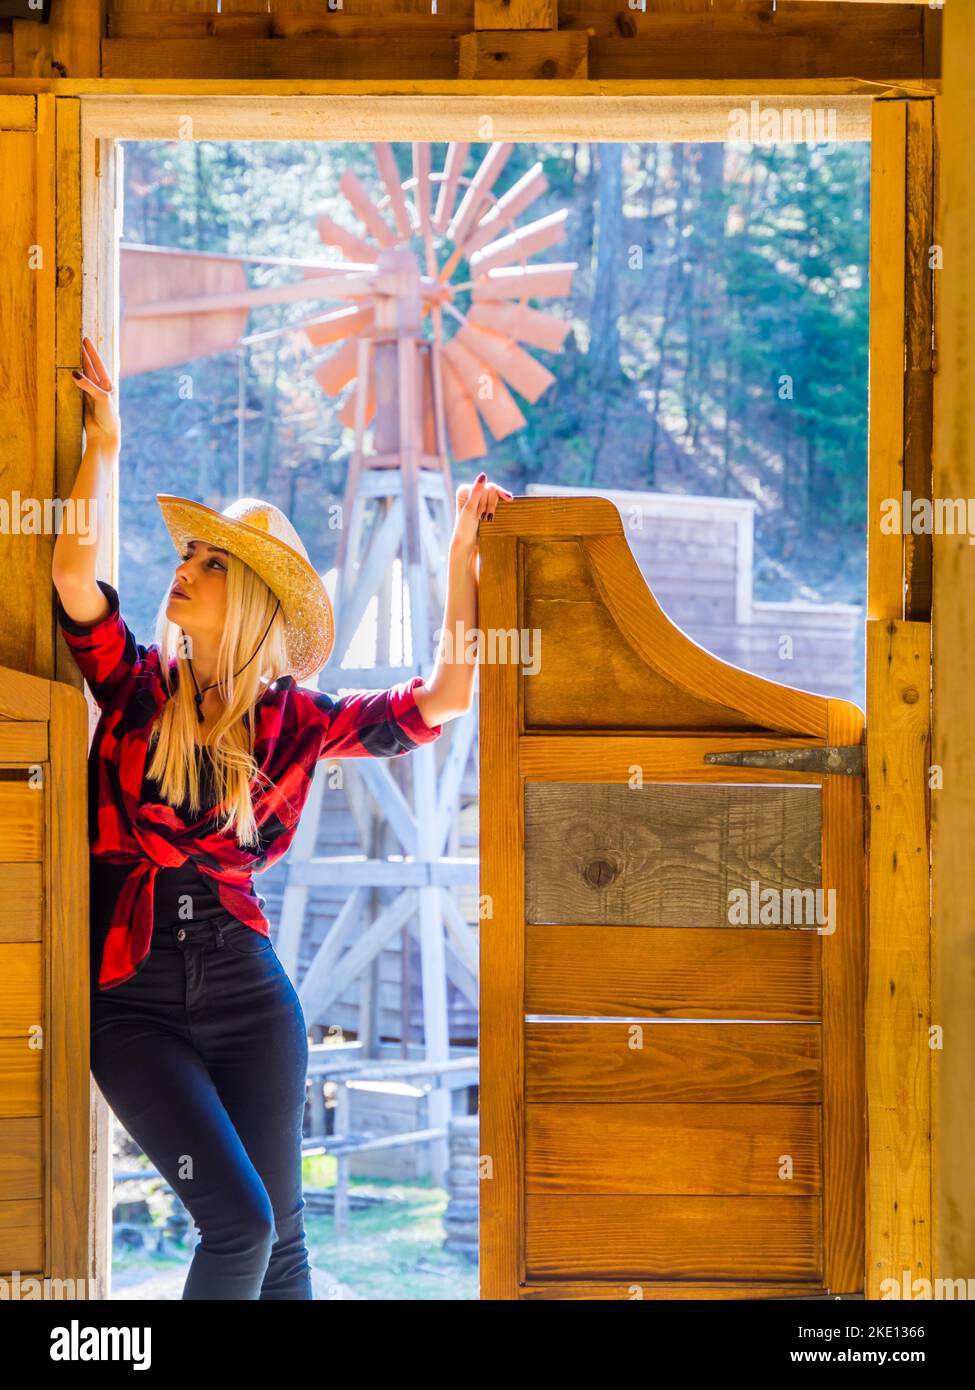 Young woman American western clothing style with plaid shirt and stetson hat standing on entrance of saloon bar looking away aside up Stock Photo